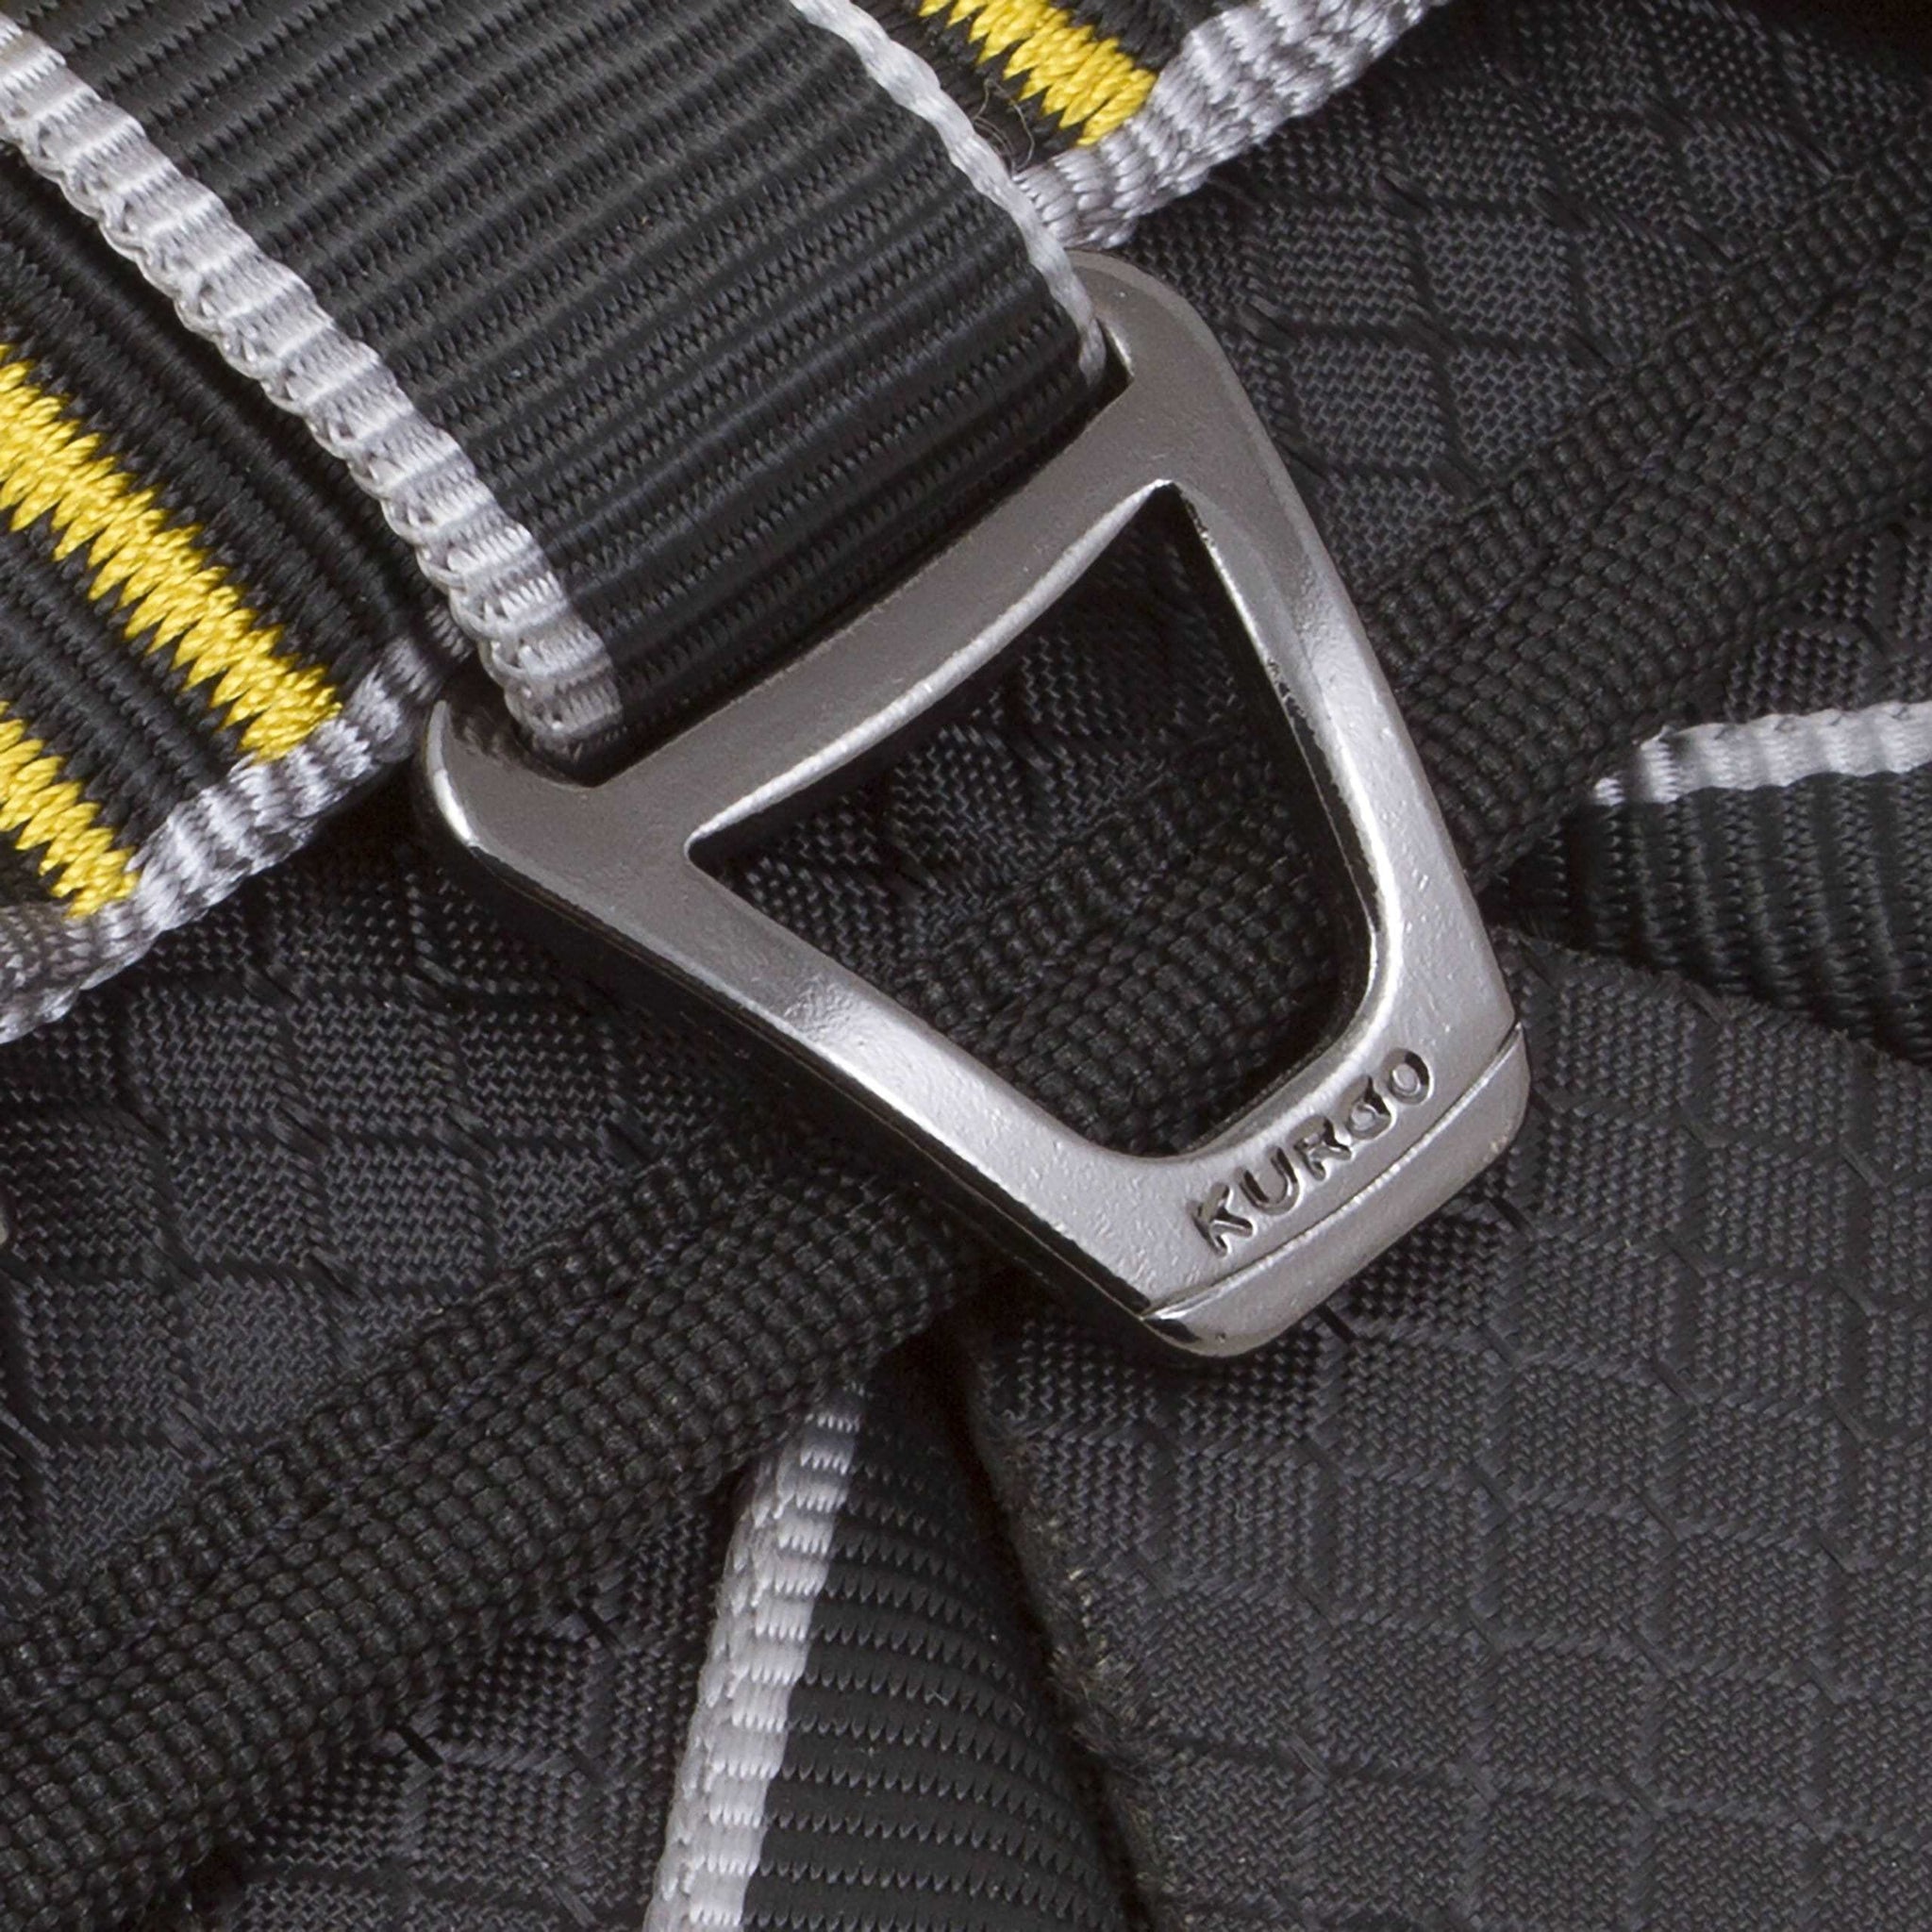 Shows the high grade hardware used on the Kurgo Impact harness